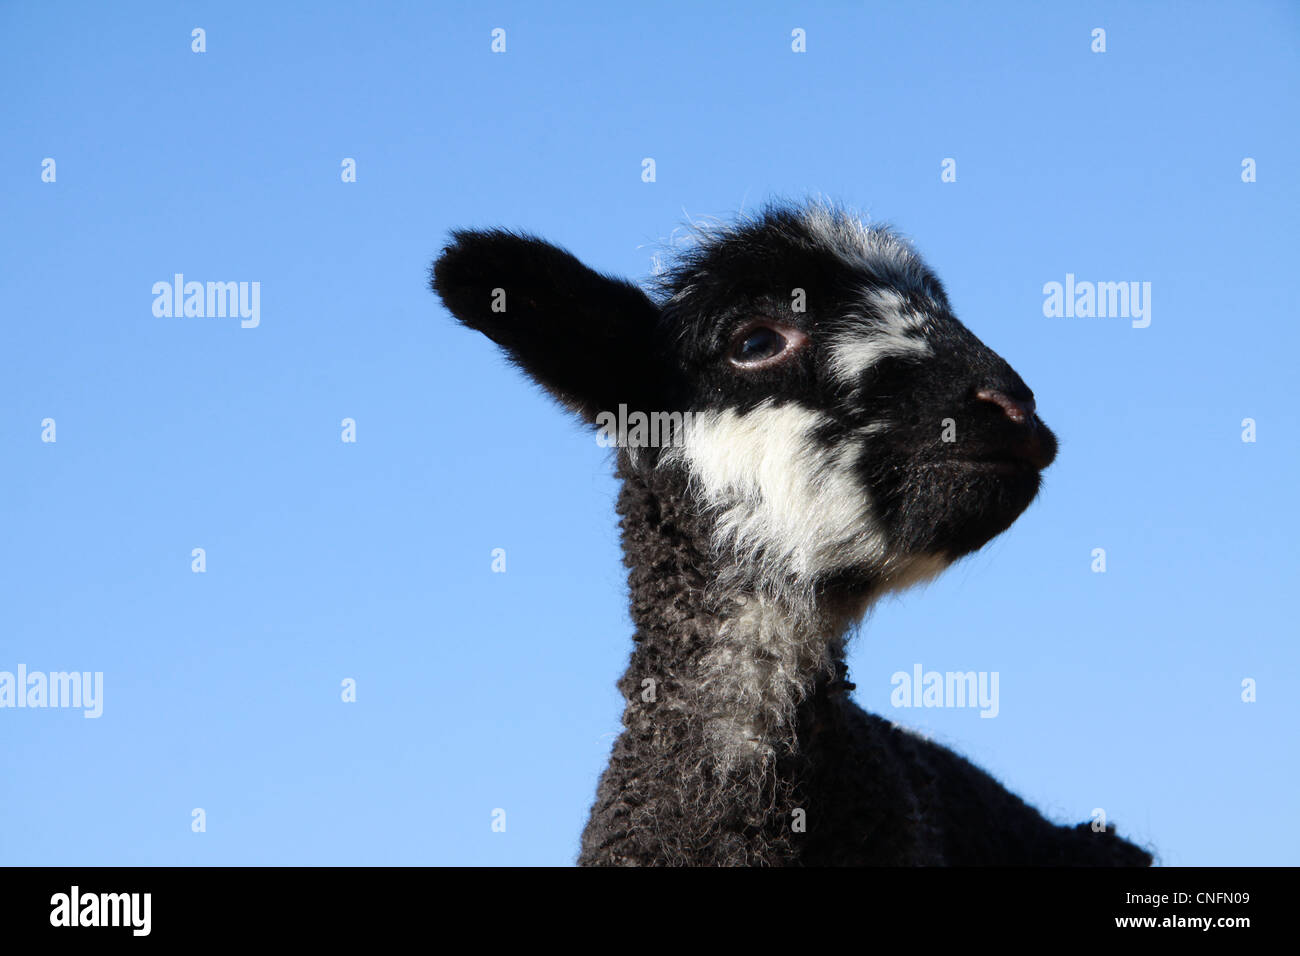 Young lamb against blue sky in horizontal landscape shape Stock Photo